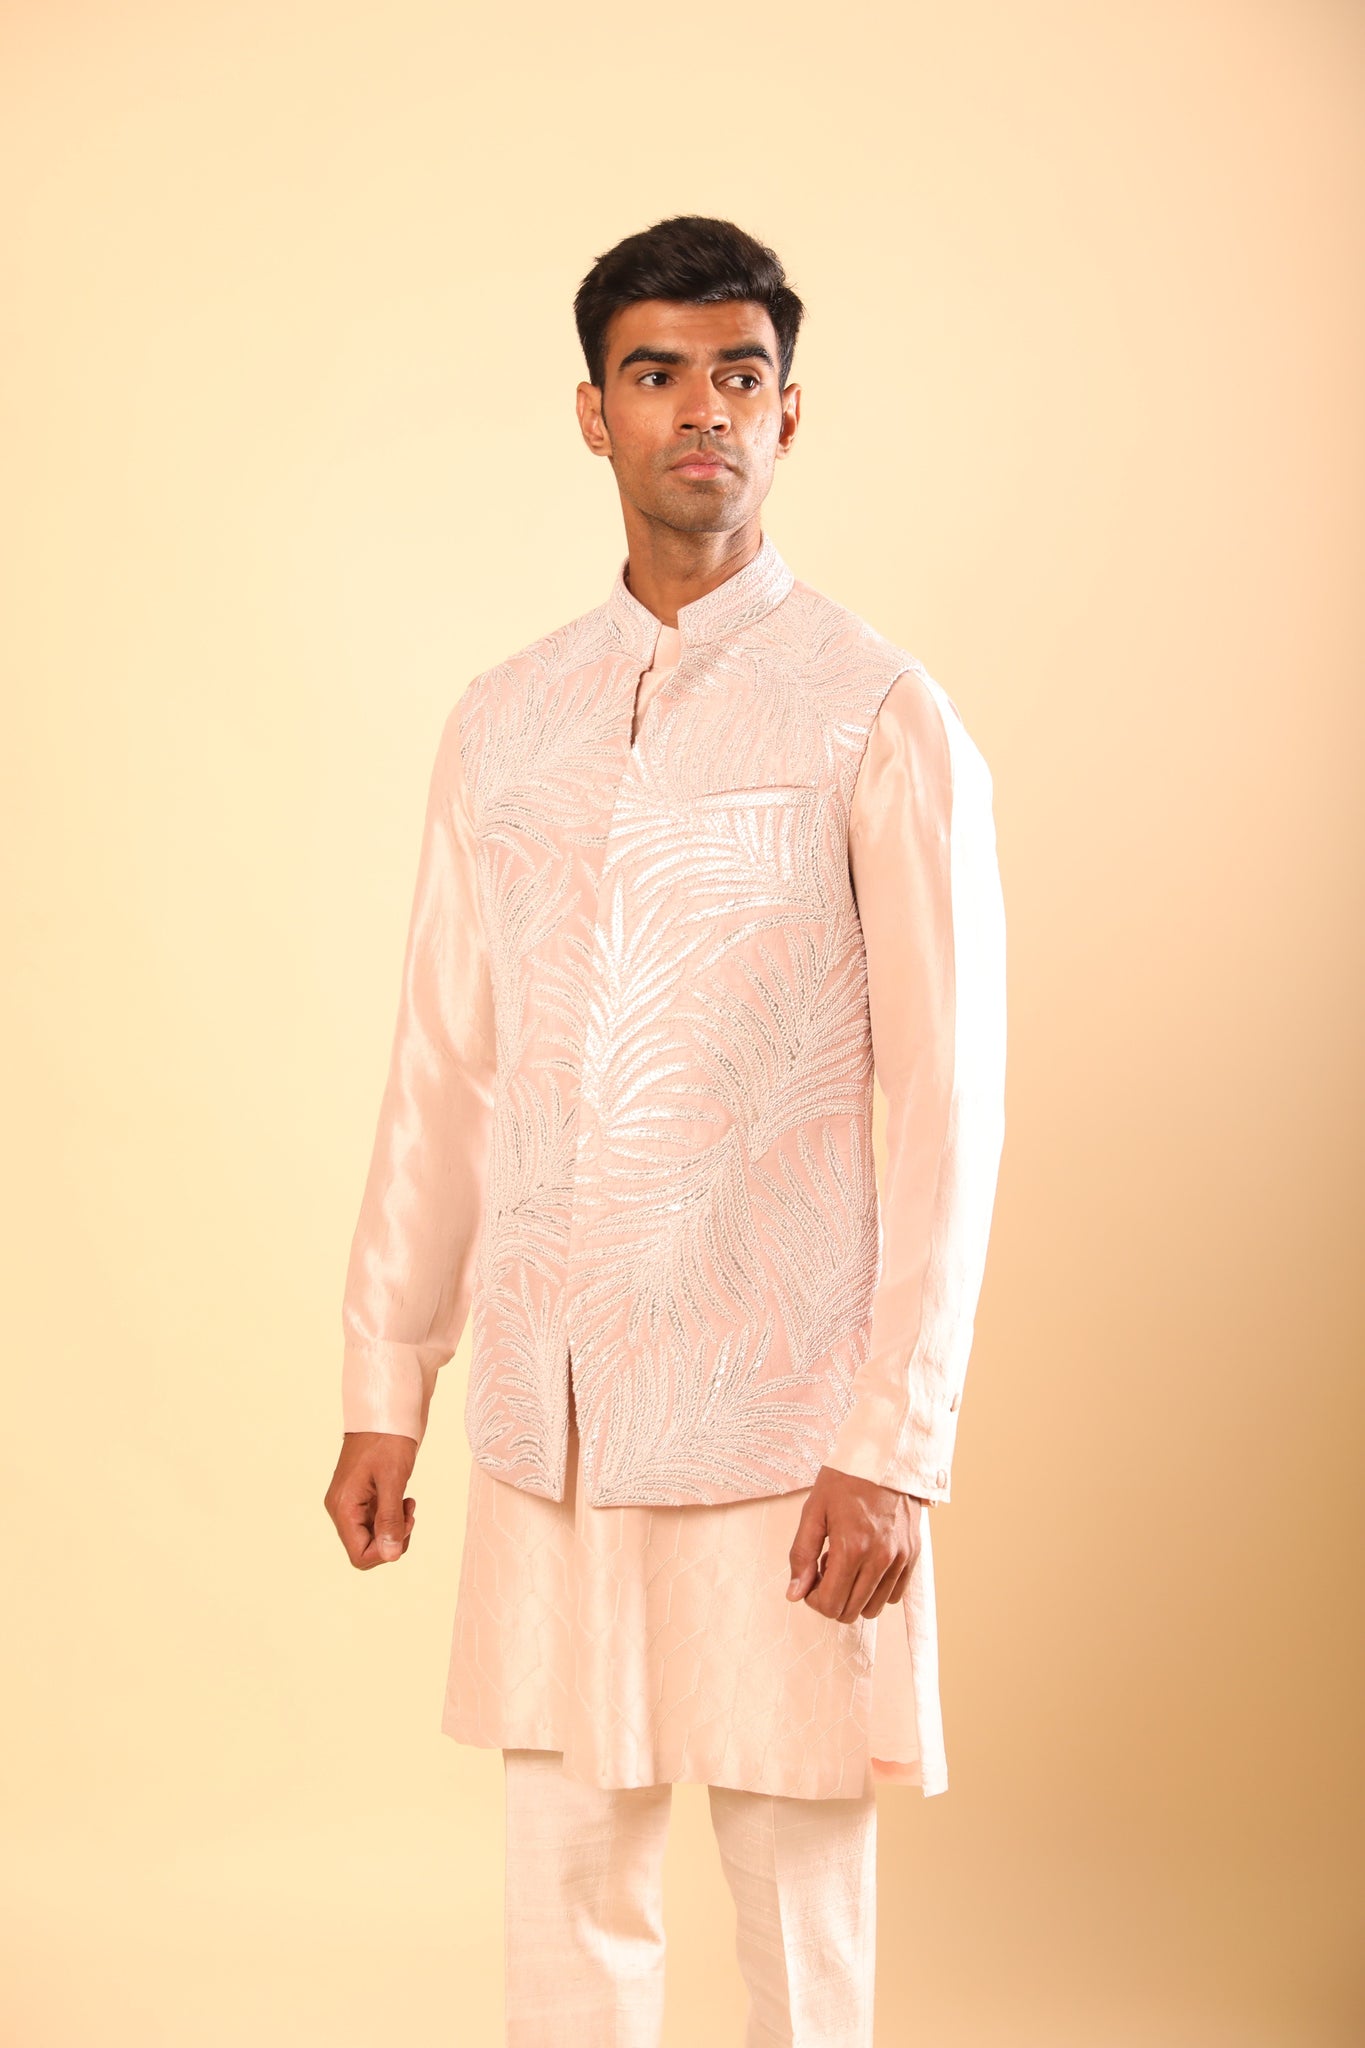 Blush Pink bandhgala with Leaf Work of Dhaga and Leather